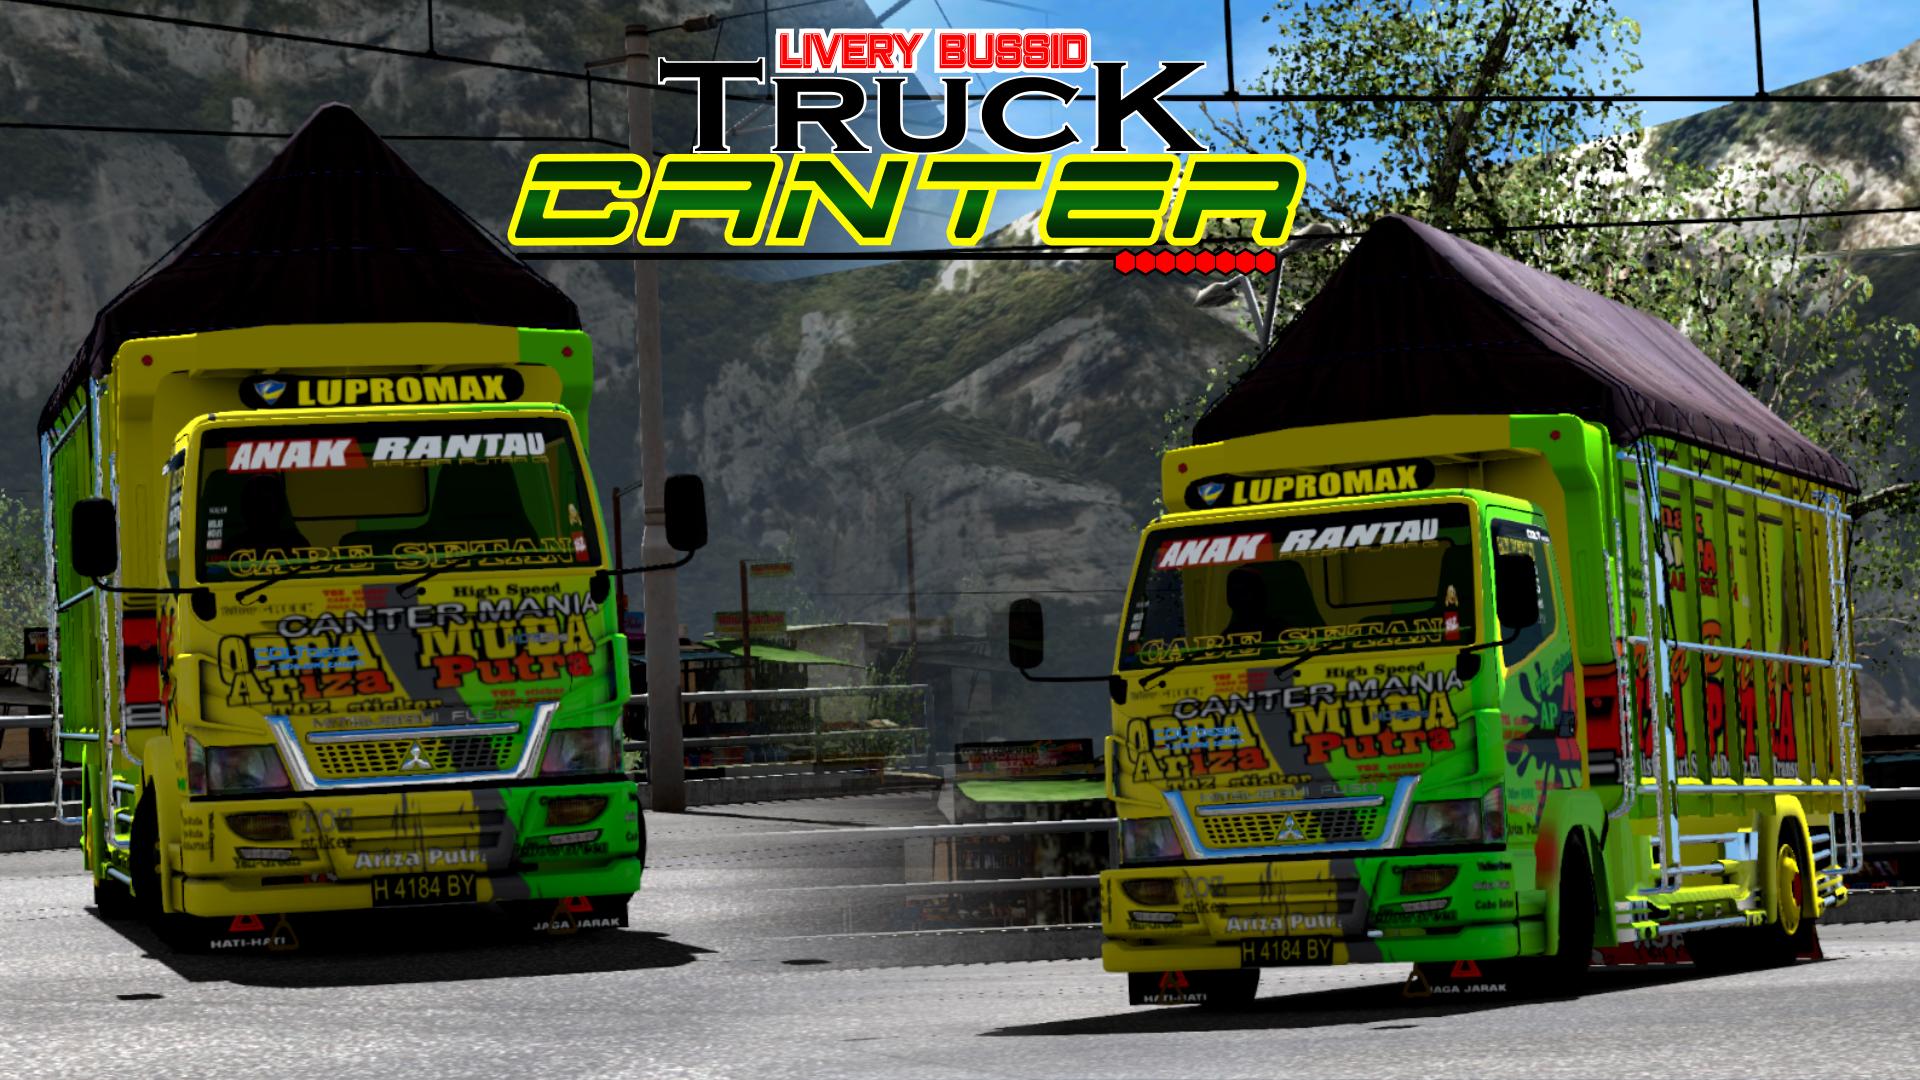 Livery Bussid Truck Canter For Android Apk Download